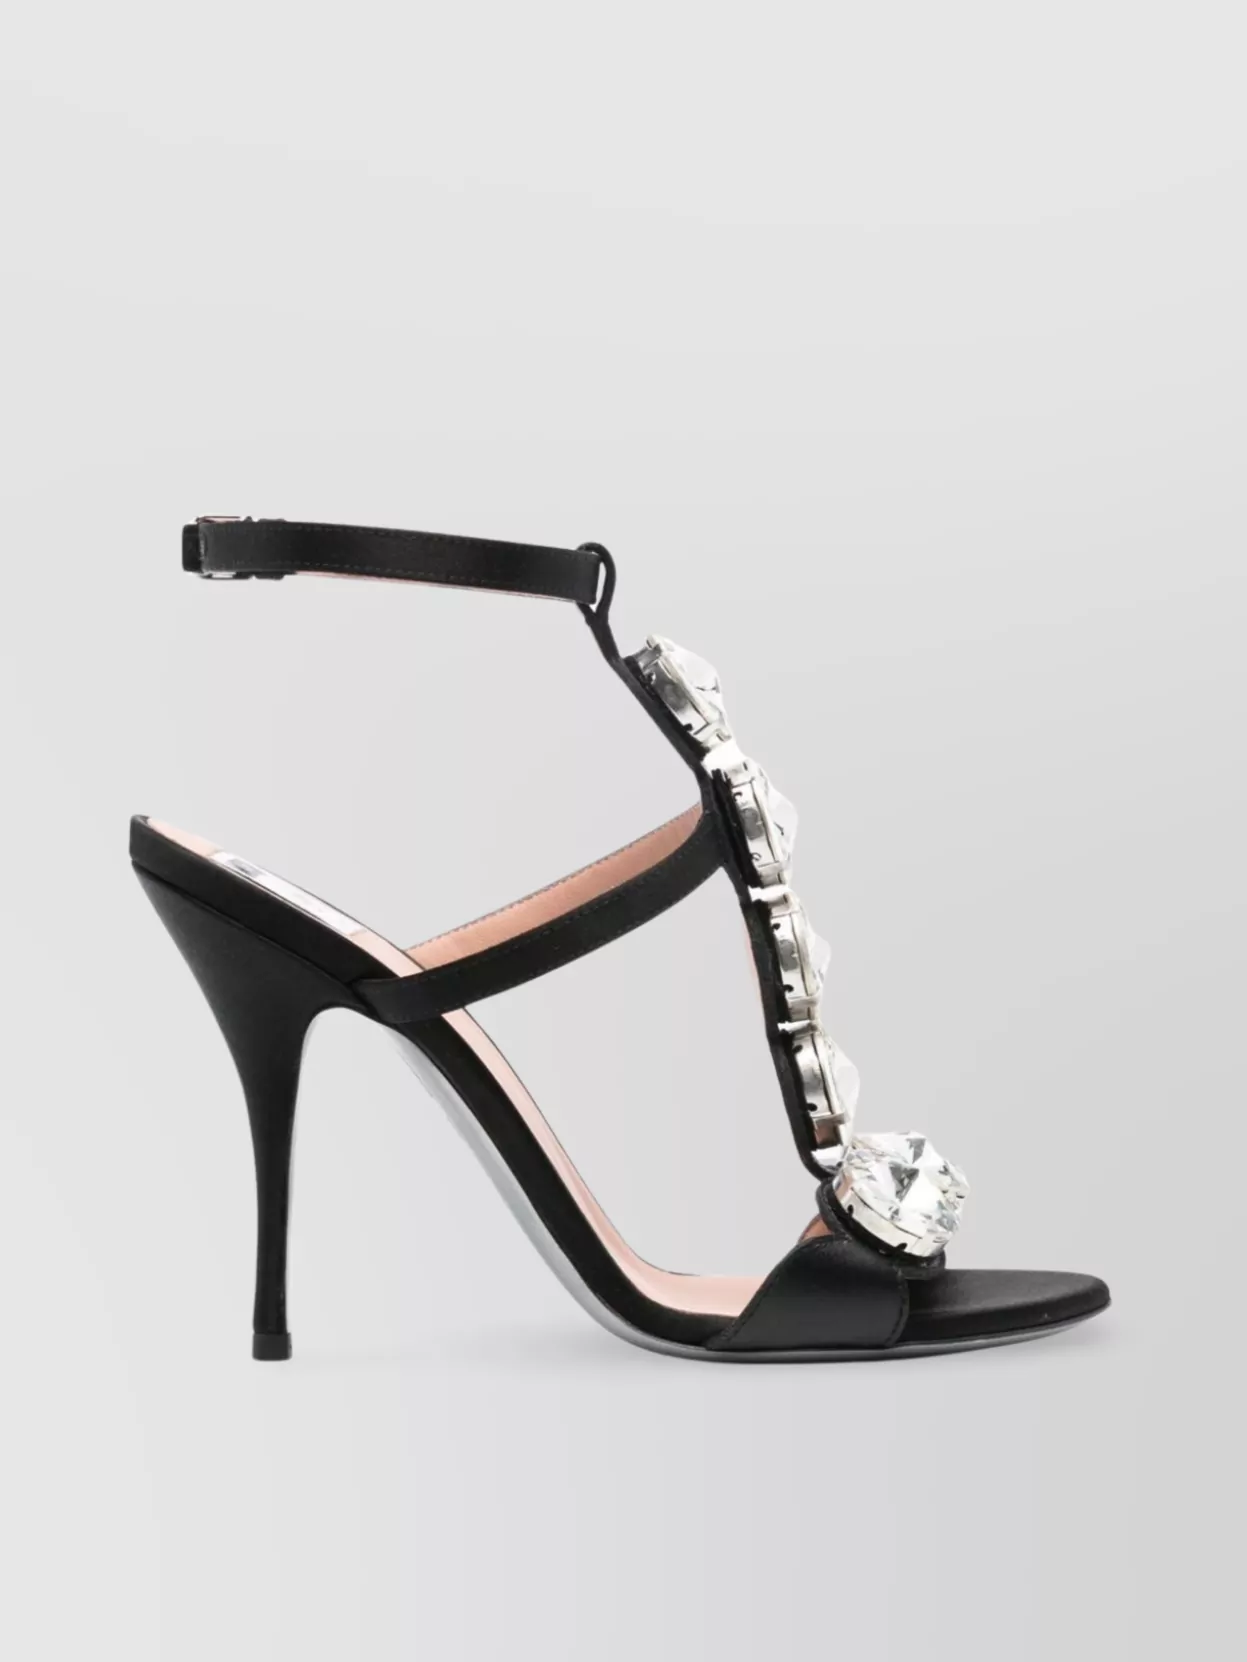 Shop Moschino Stiletto Heel Sandals With Almond Toe And Gem Embellishment